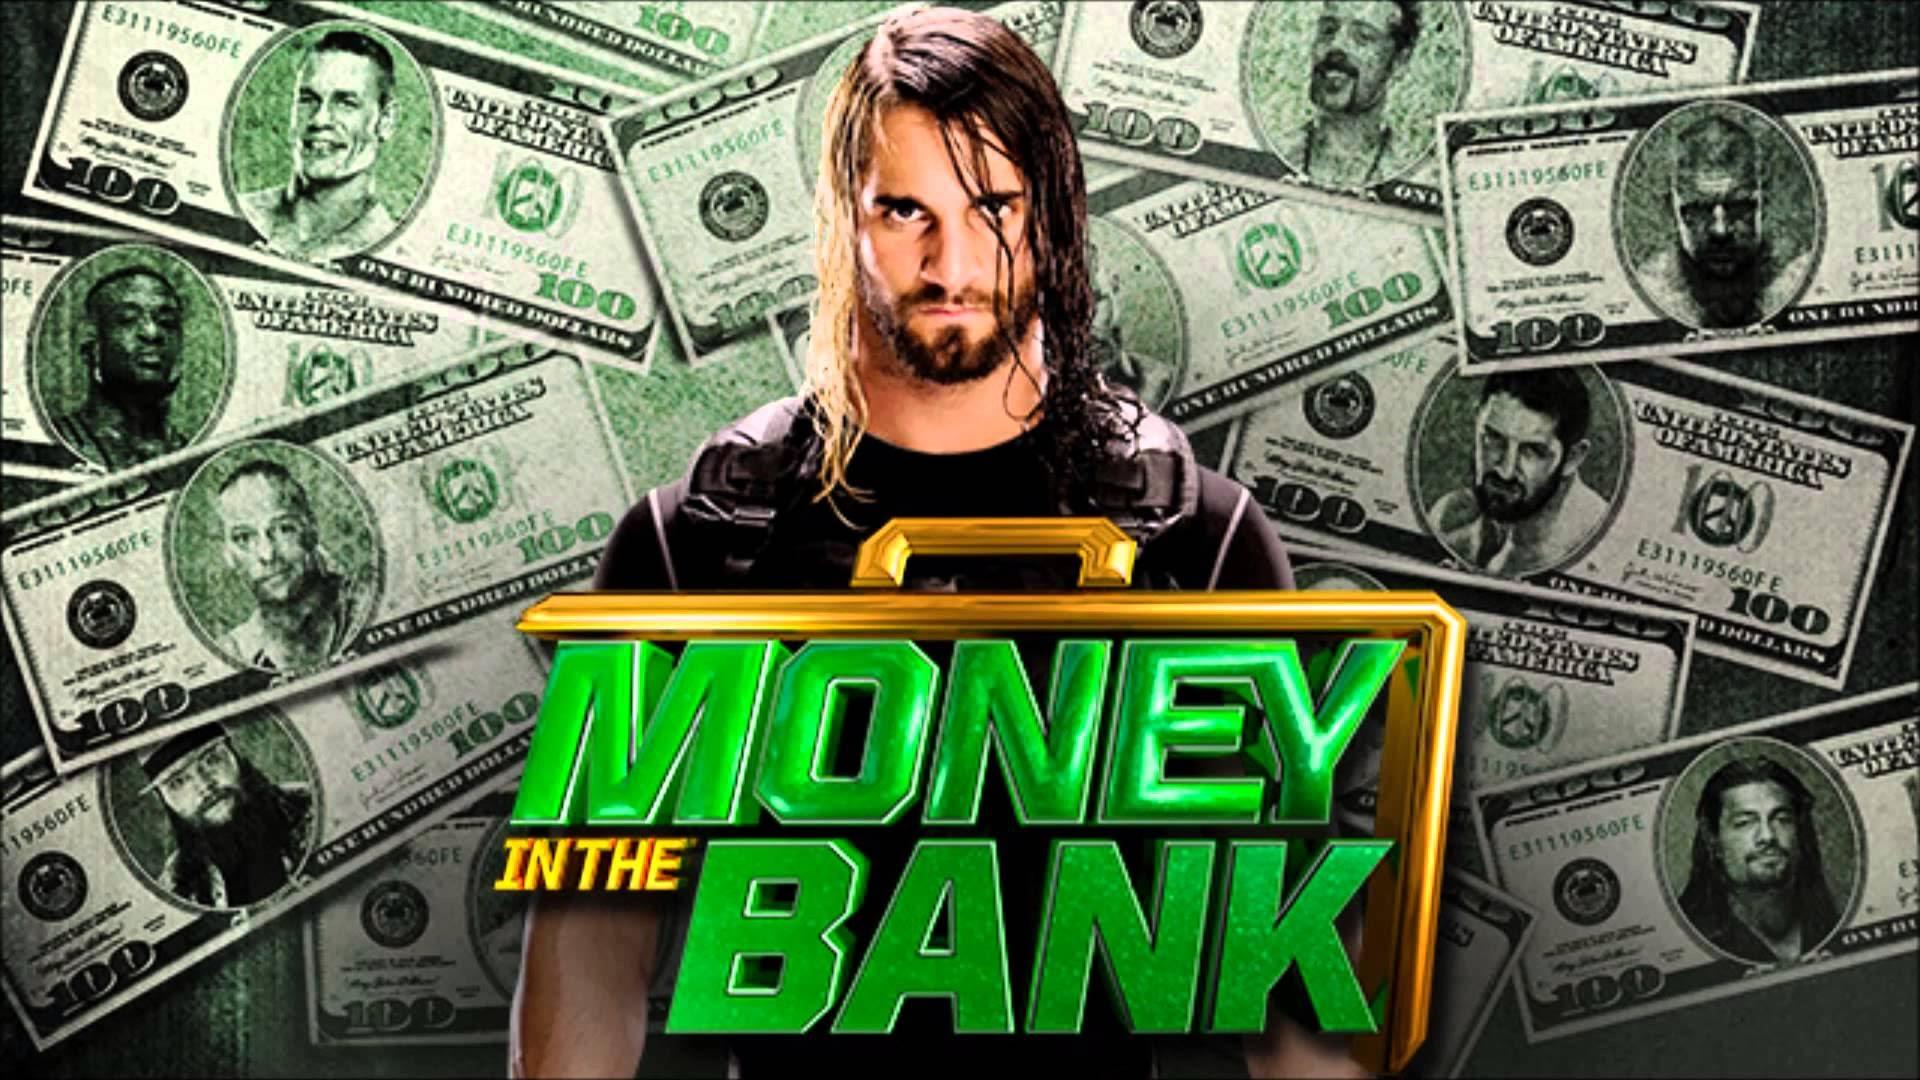 WWE 2K15. Money in the bank 2015 Simulation